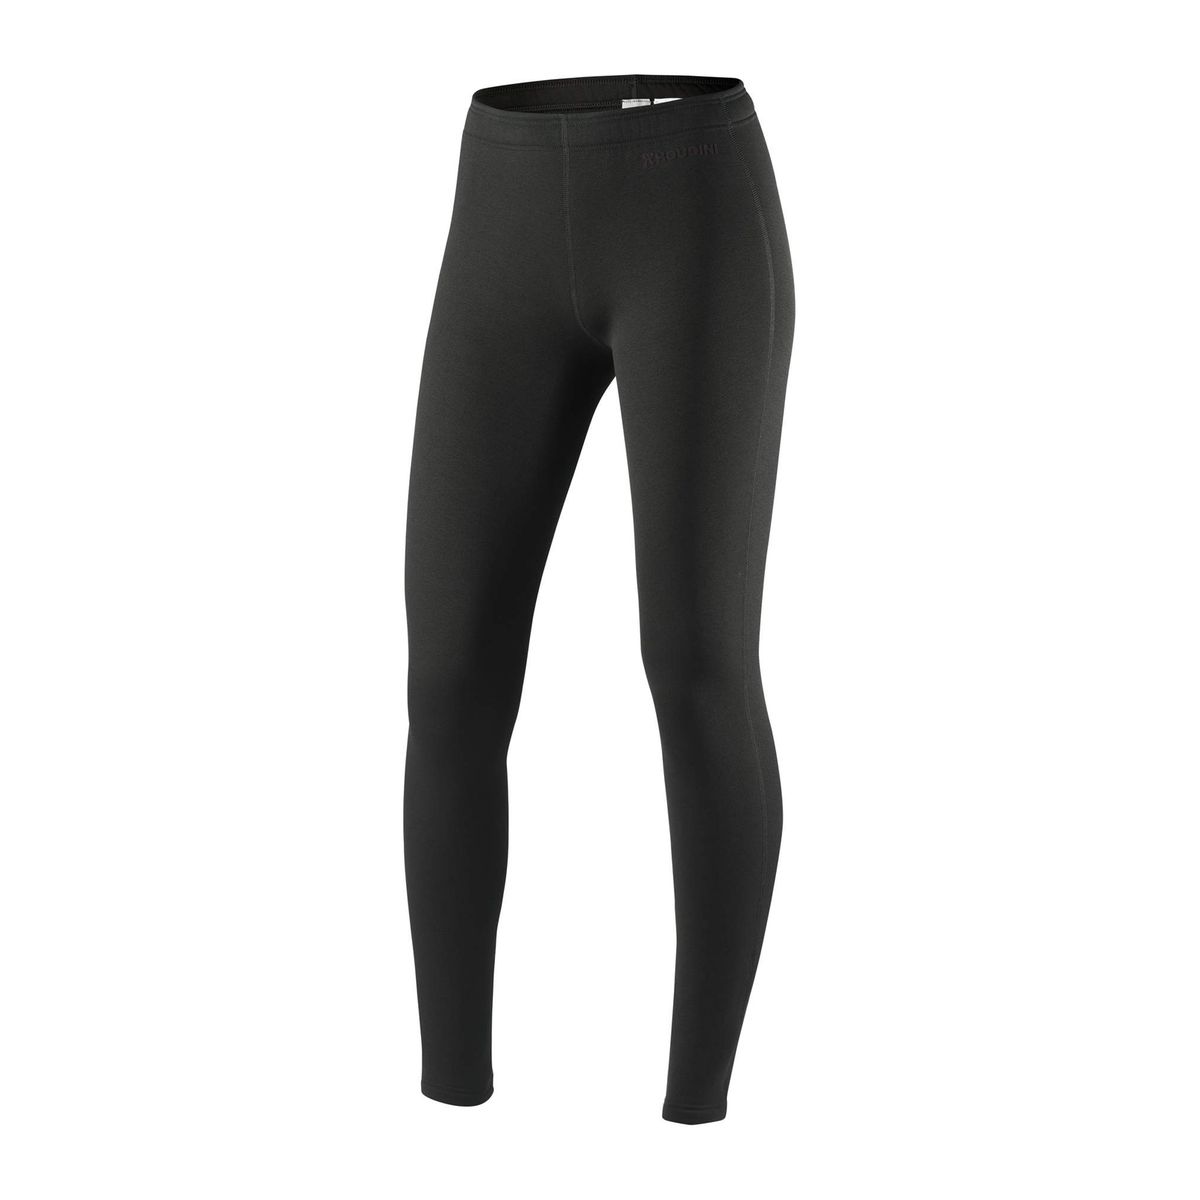 W's Long Power Tights